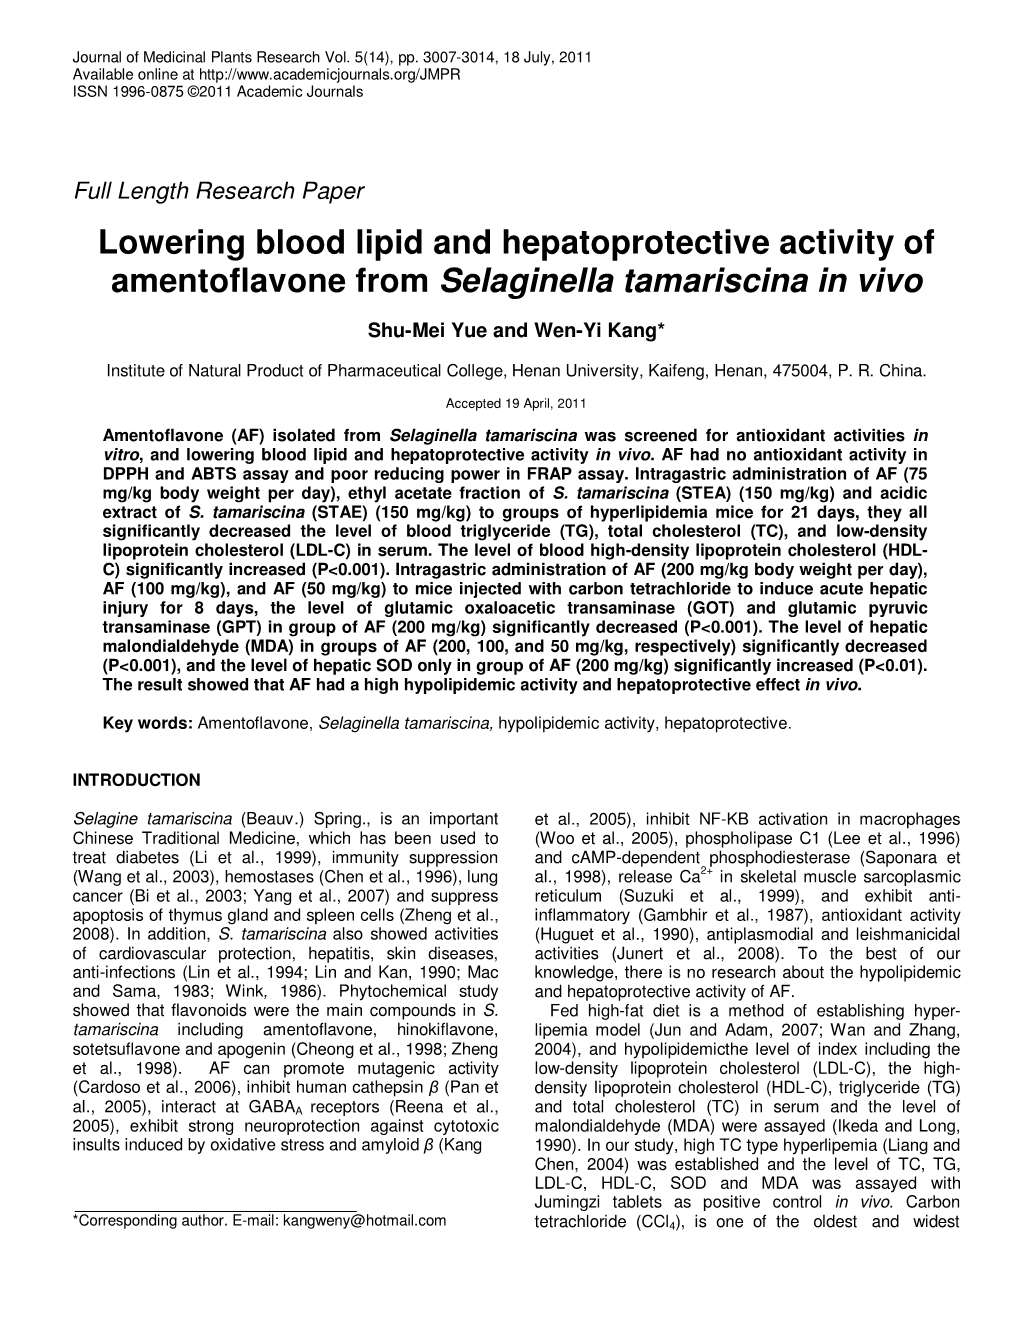 Lowering Blood Lipid and Hepatoprotective Activity of Amentoflavone from Selaginella Tamariscina in Vivo